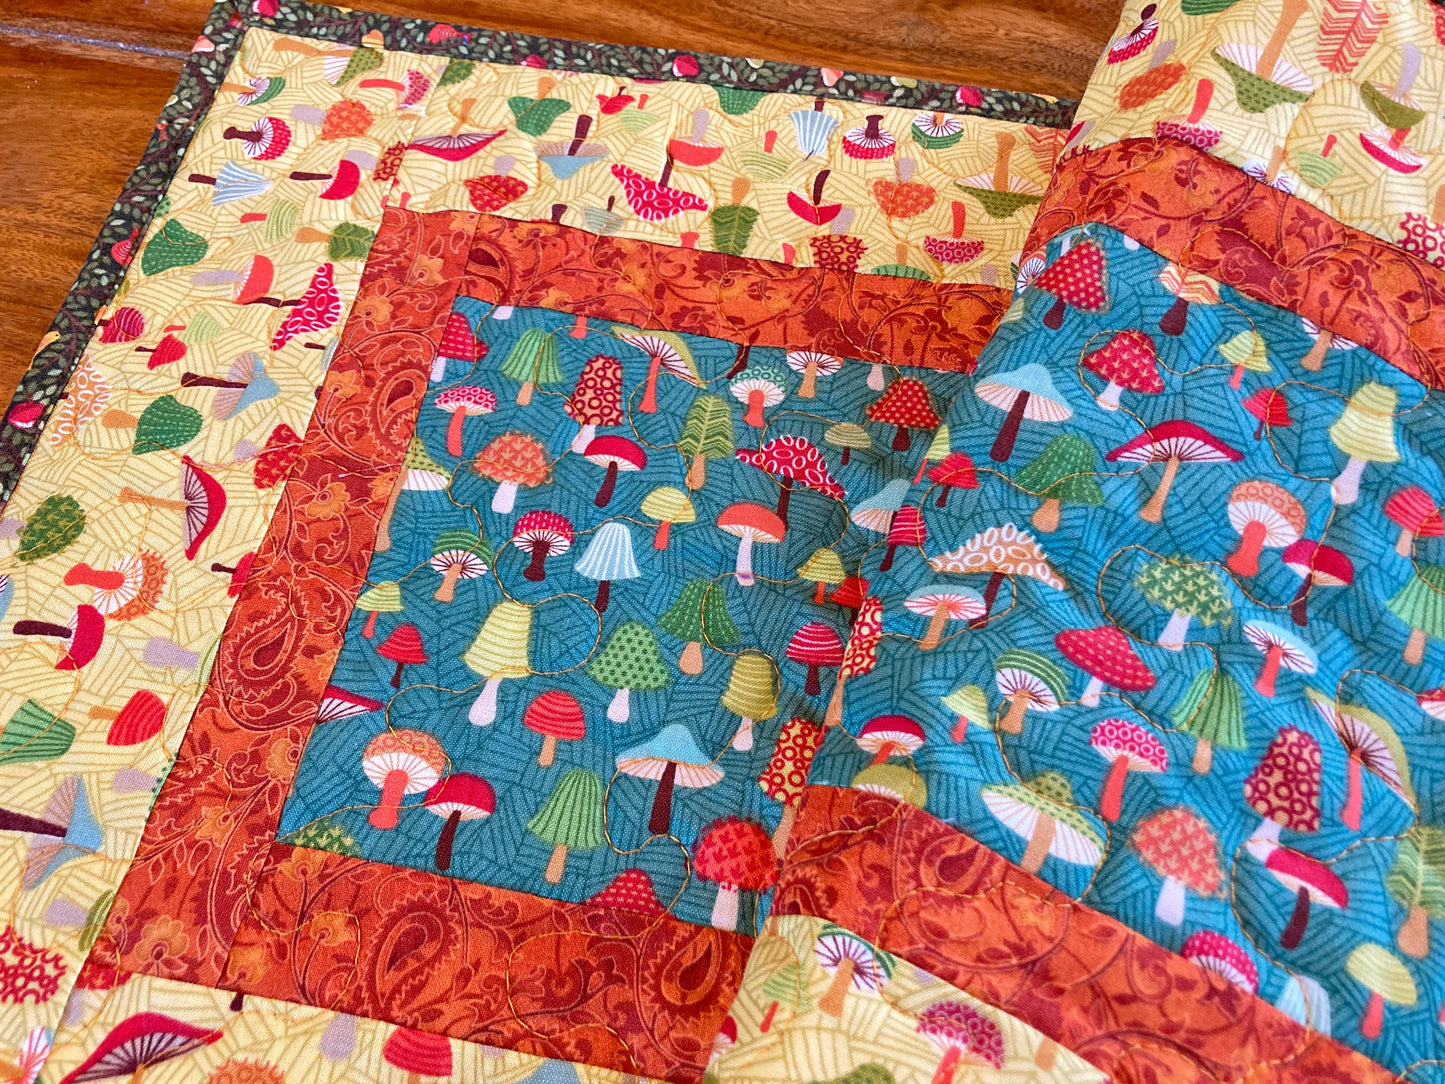 Quilted Table Runner, Whimsical Mushrooms 13x48" Reversible, Mushroomcore Toadstools Dining Coffee Table, Yellow Green Orange Kids Fun